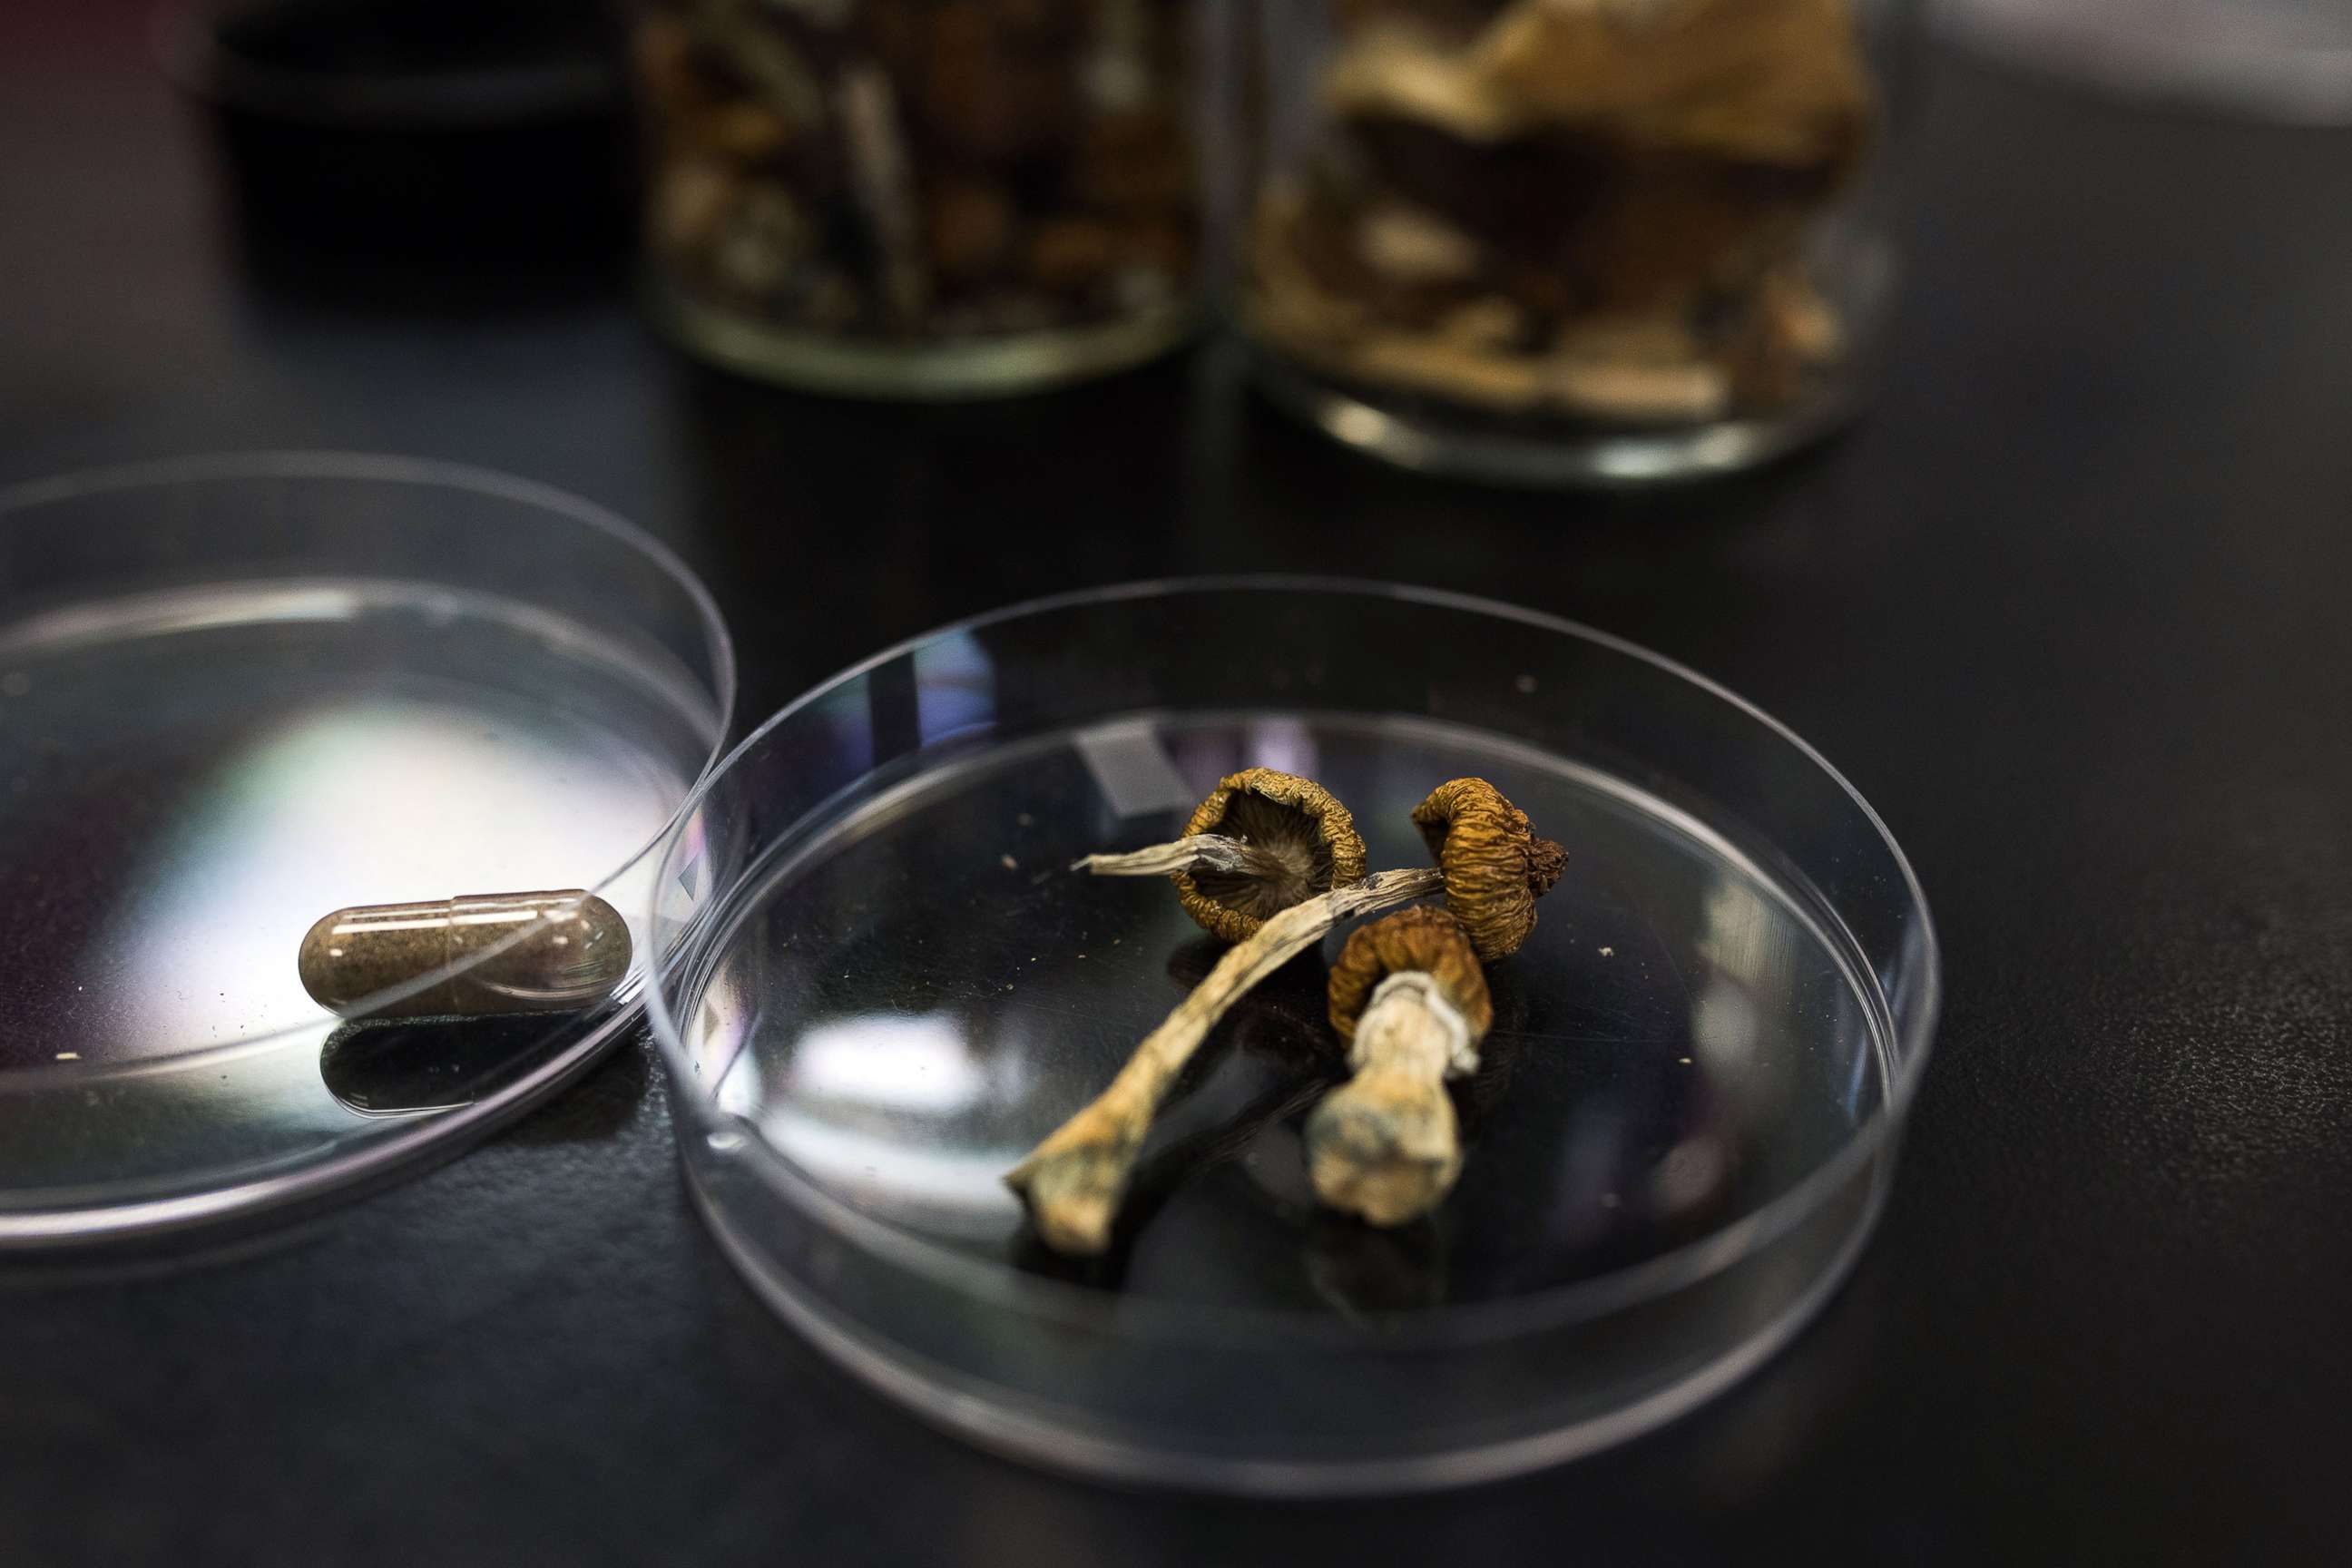 Where Can You (Legally) Buy Magic Mushrooms?